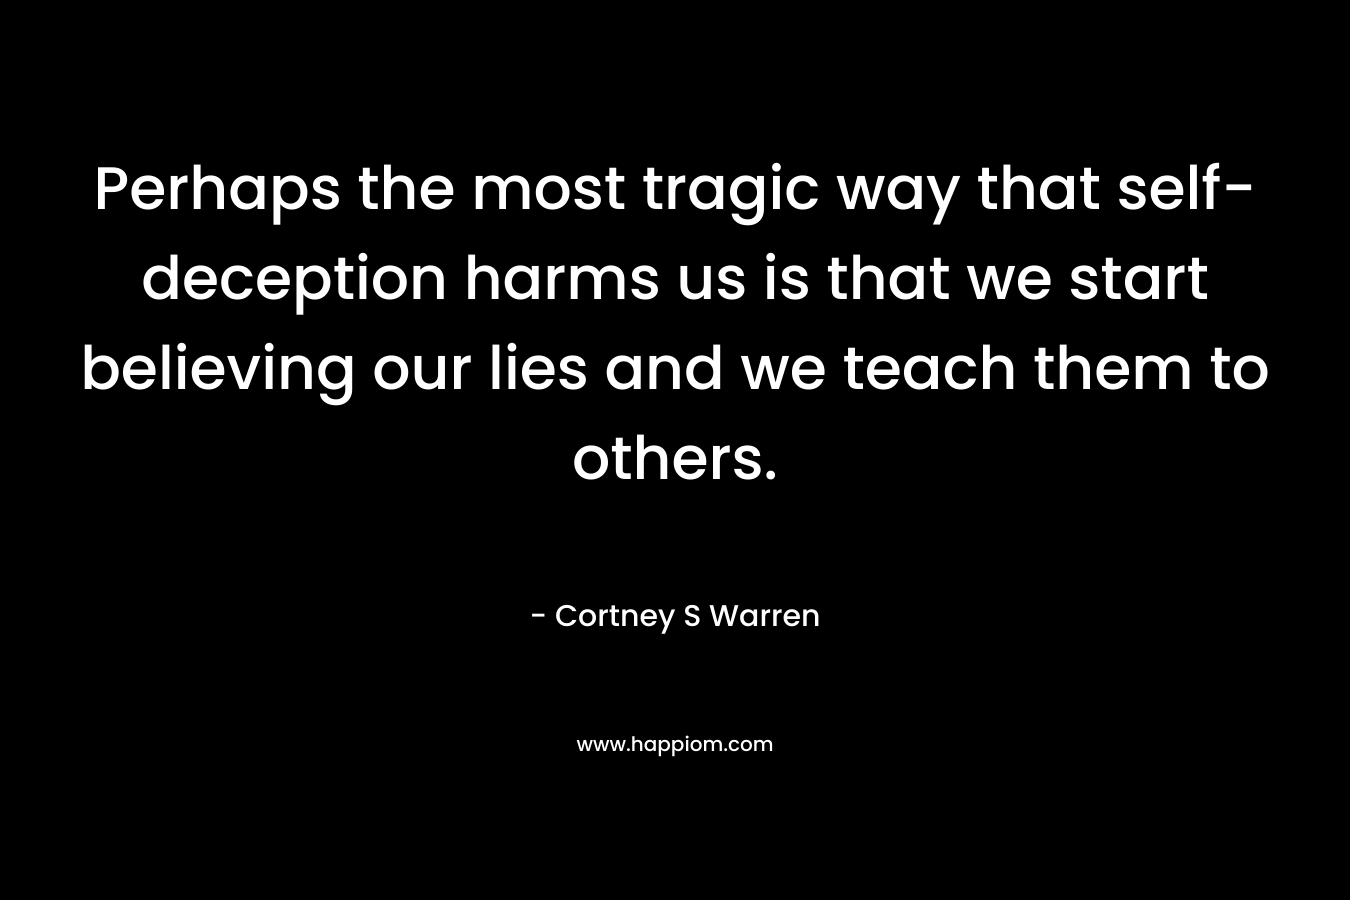 Perhaps the most tragic way that self-deception harms us is that we start believing our lies and we teach them to others. – Cortney S Warren